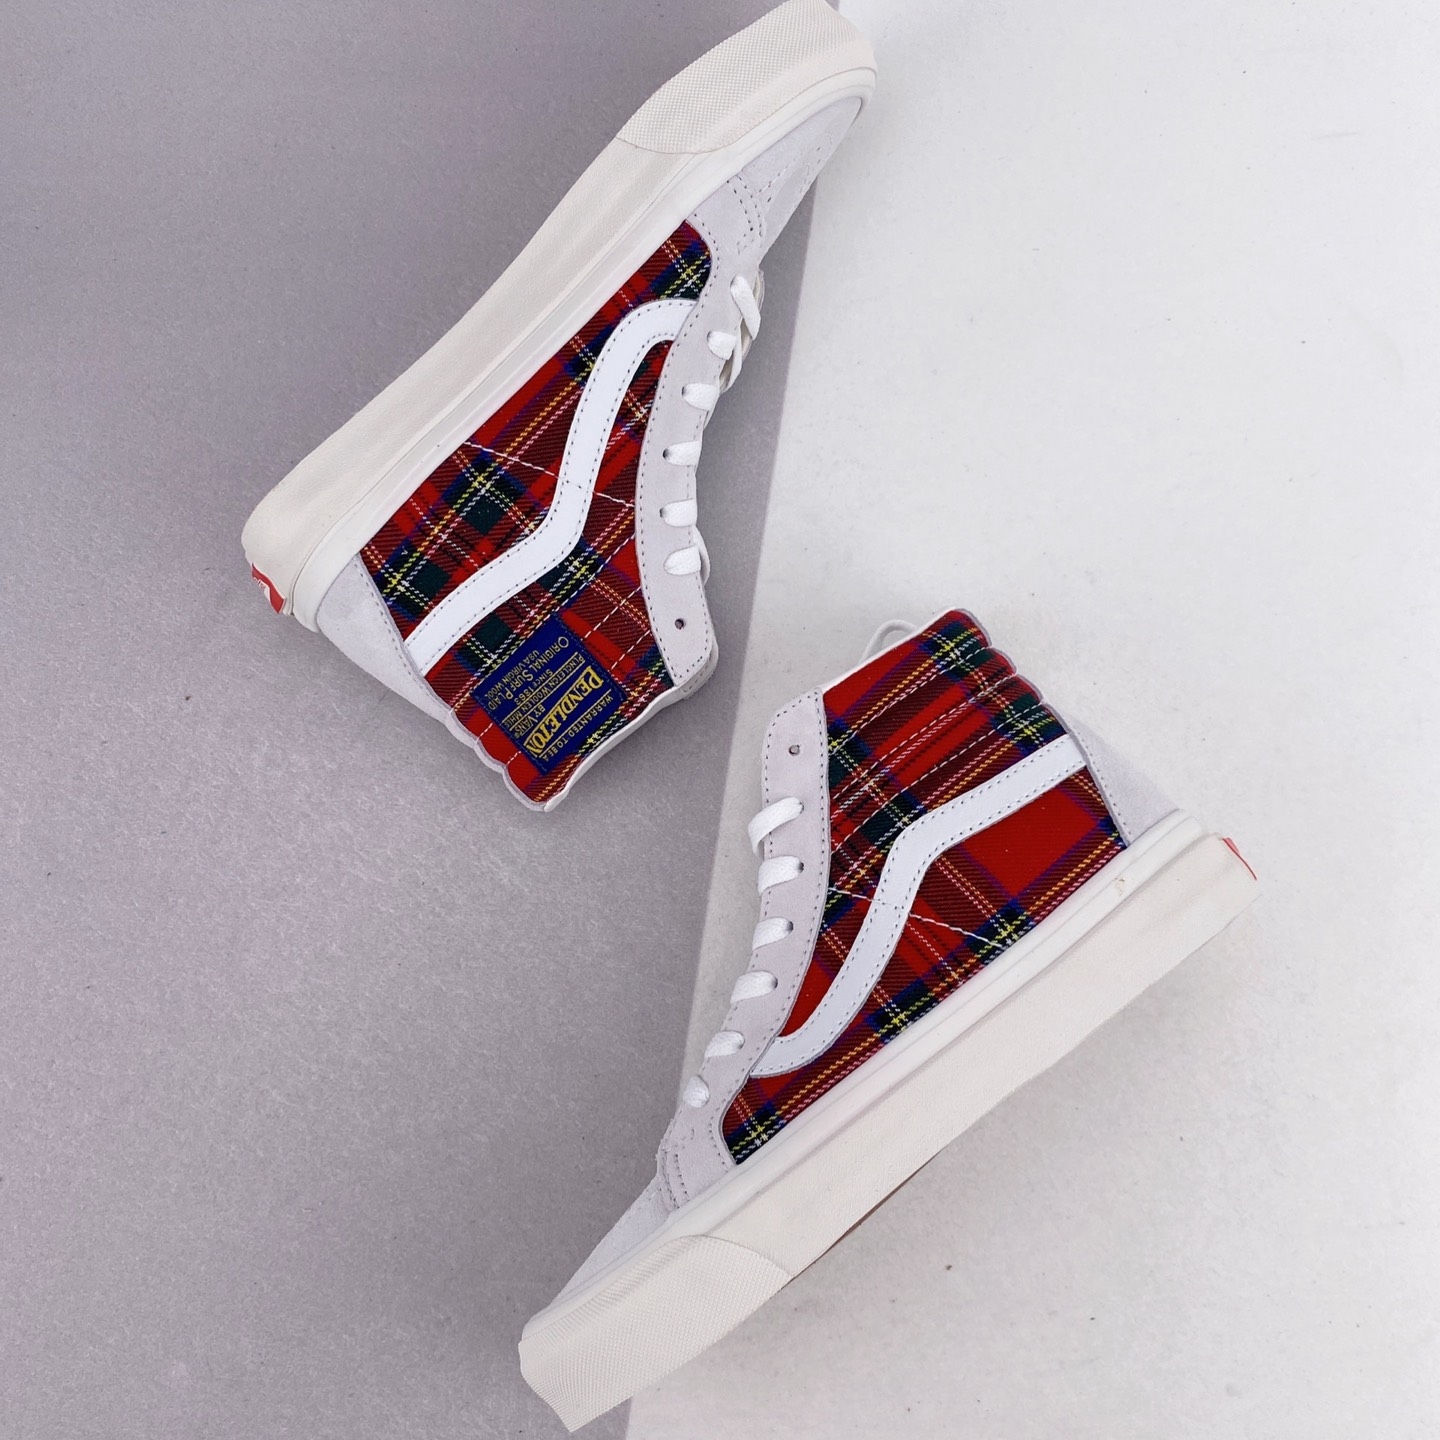 Pendleton x Vans Unisex Style 38 Sneakers Red White VN0A38GF9GT - Limited Edition Comfort and Style